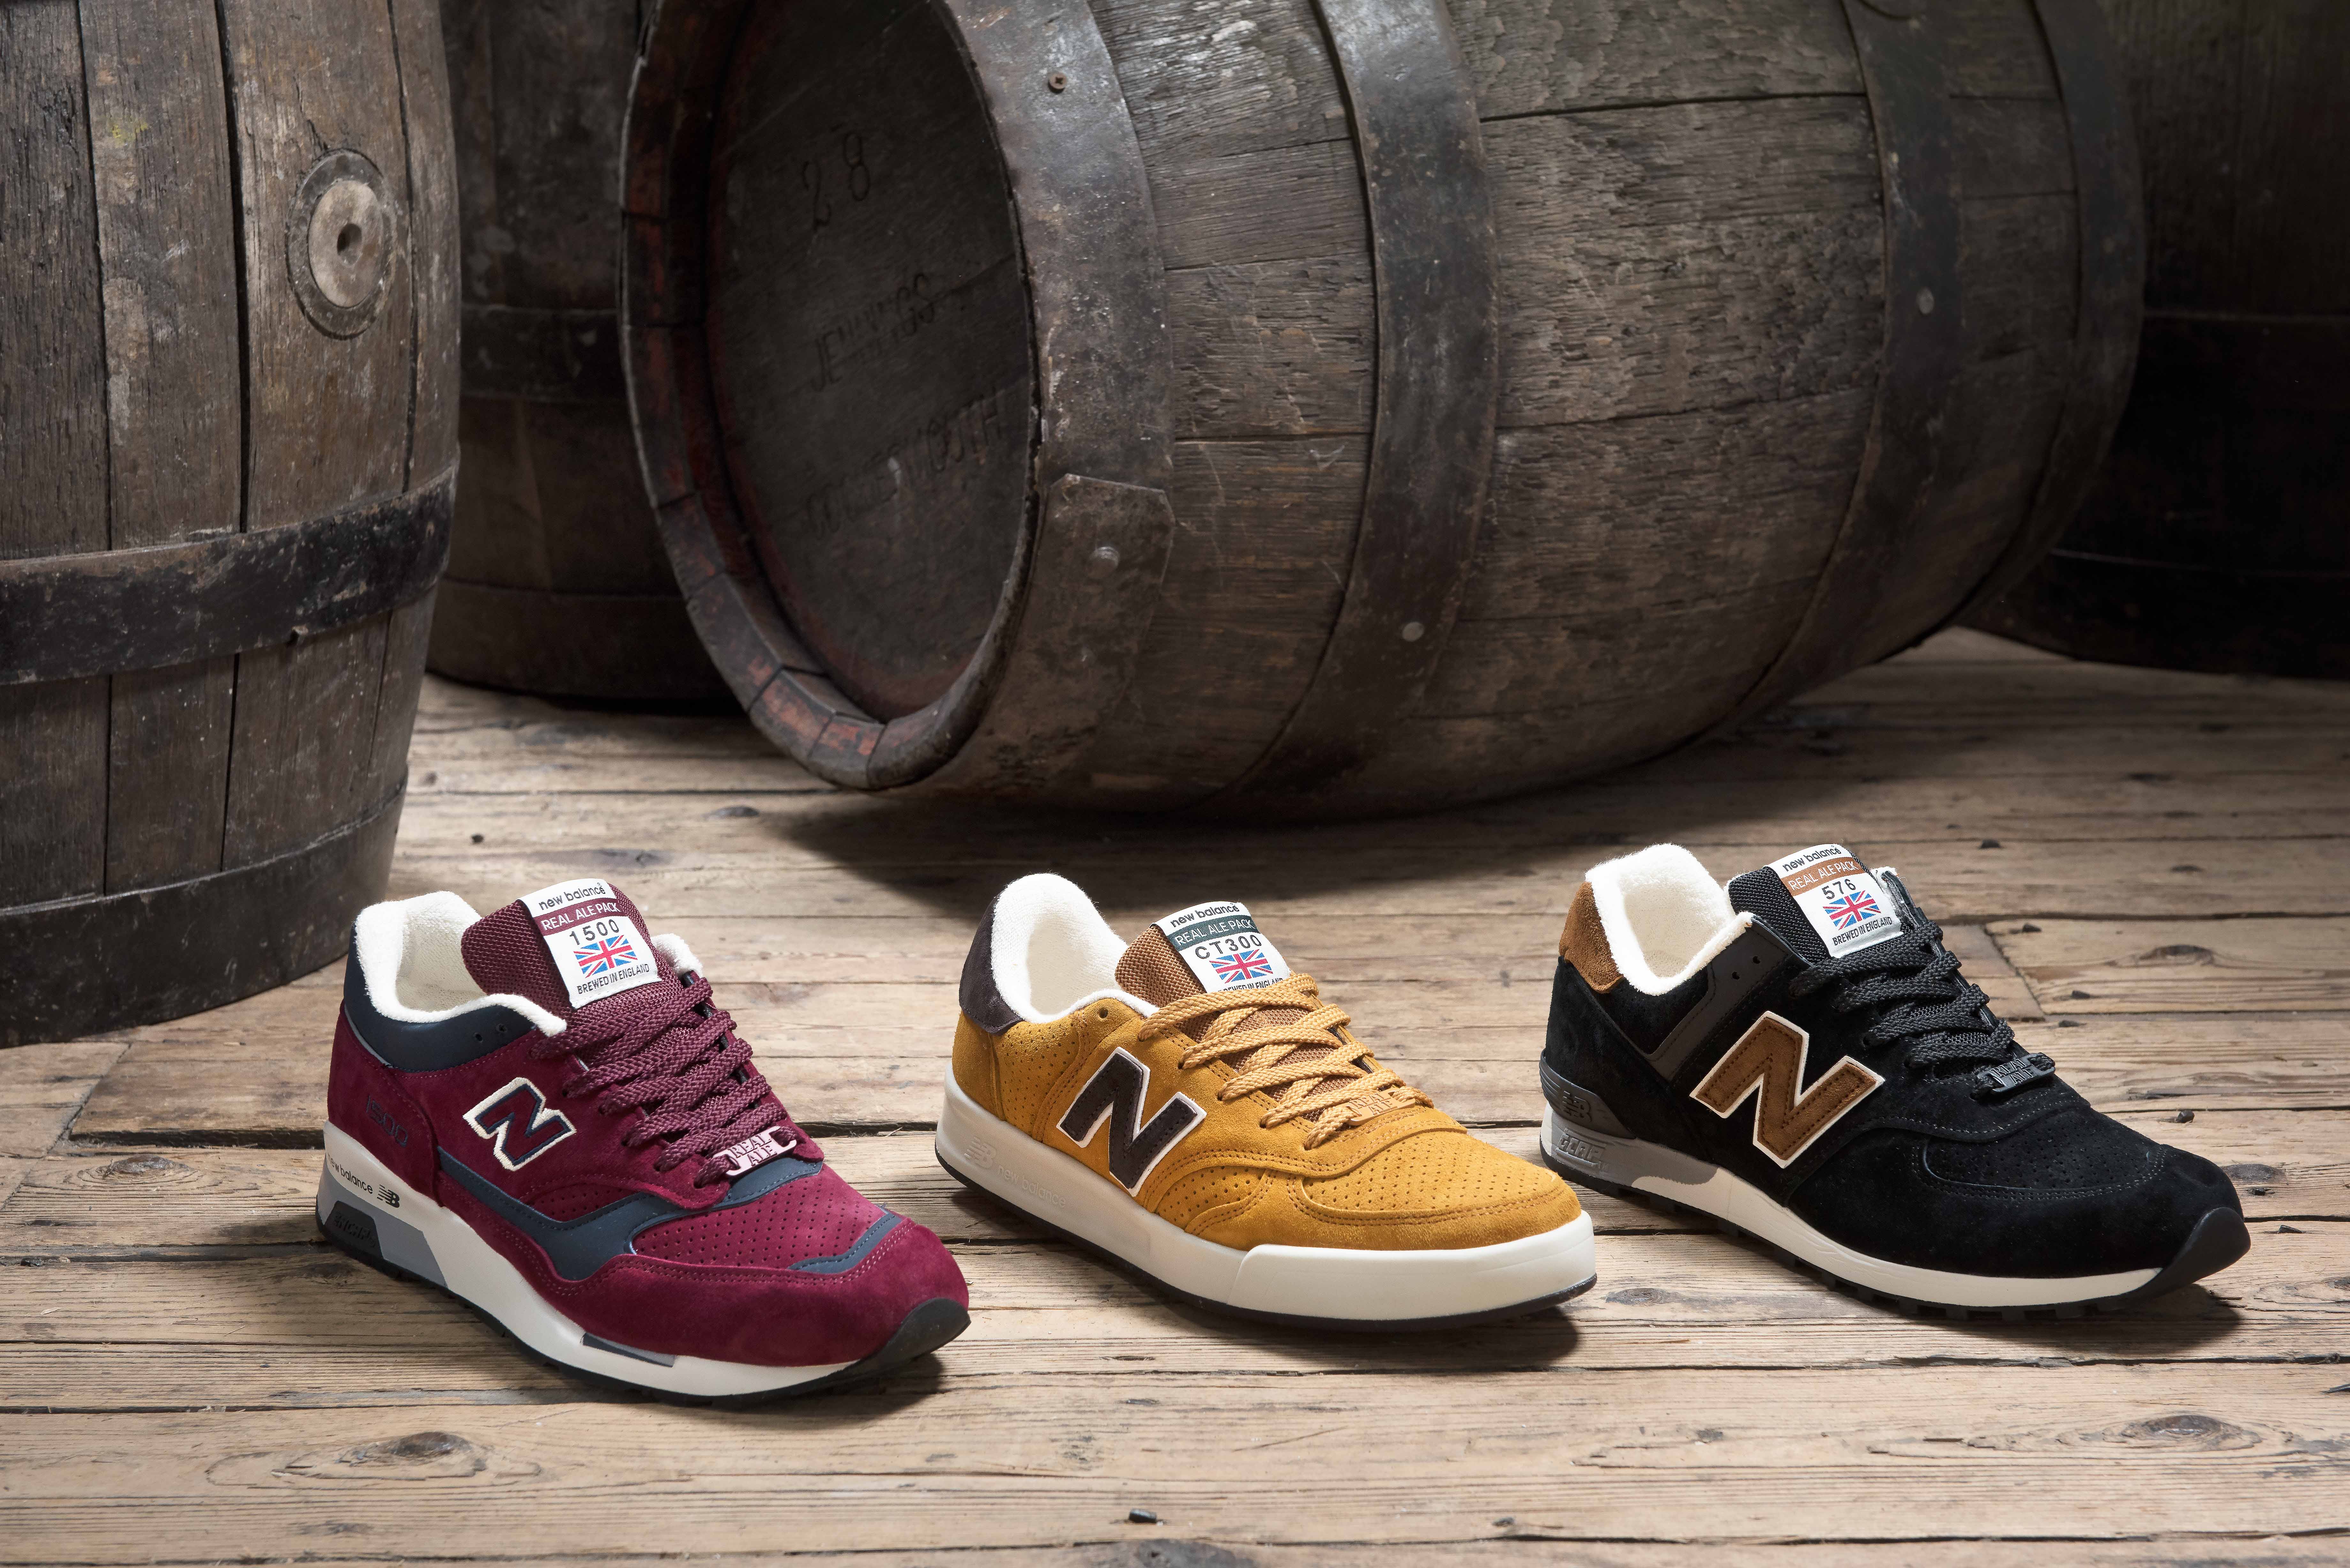 New Balance “Real Ale” Pack | New Balance Gallery